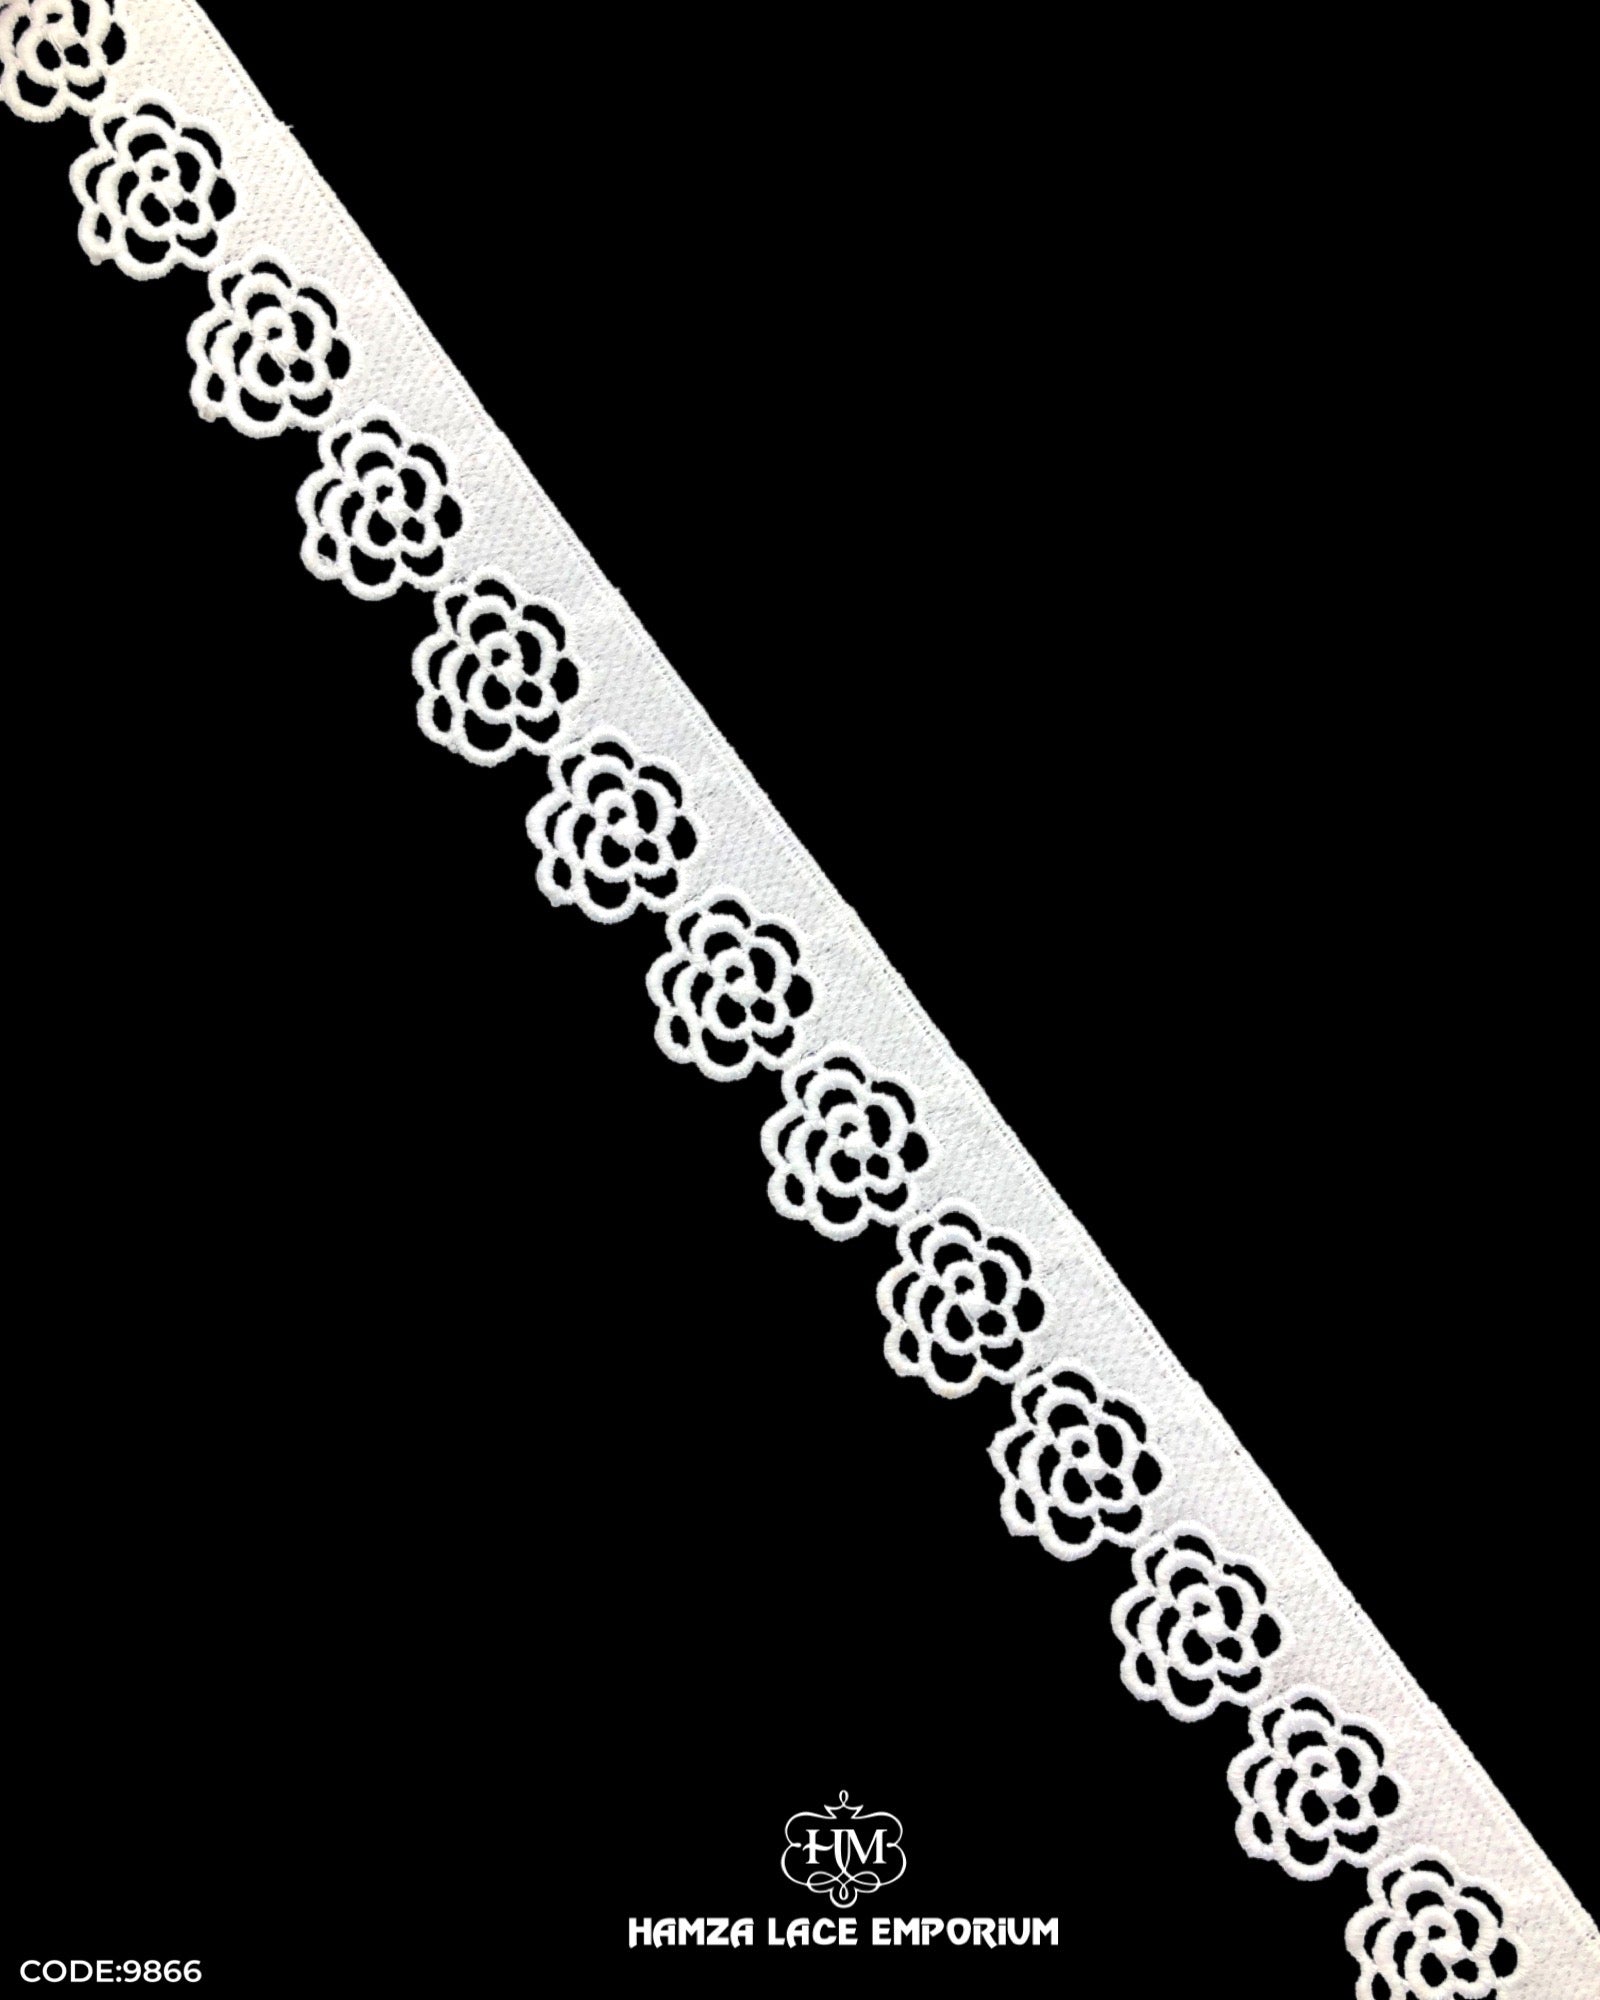 'Edging Flower Design Lace 9866' with 'Hamza Lace' Sign at the bottom